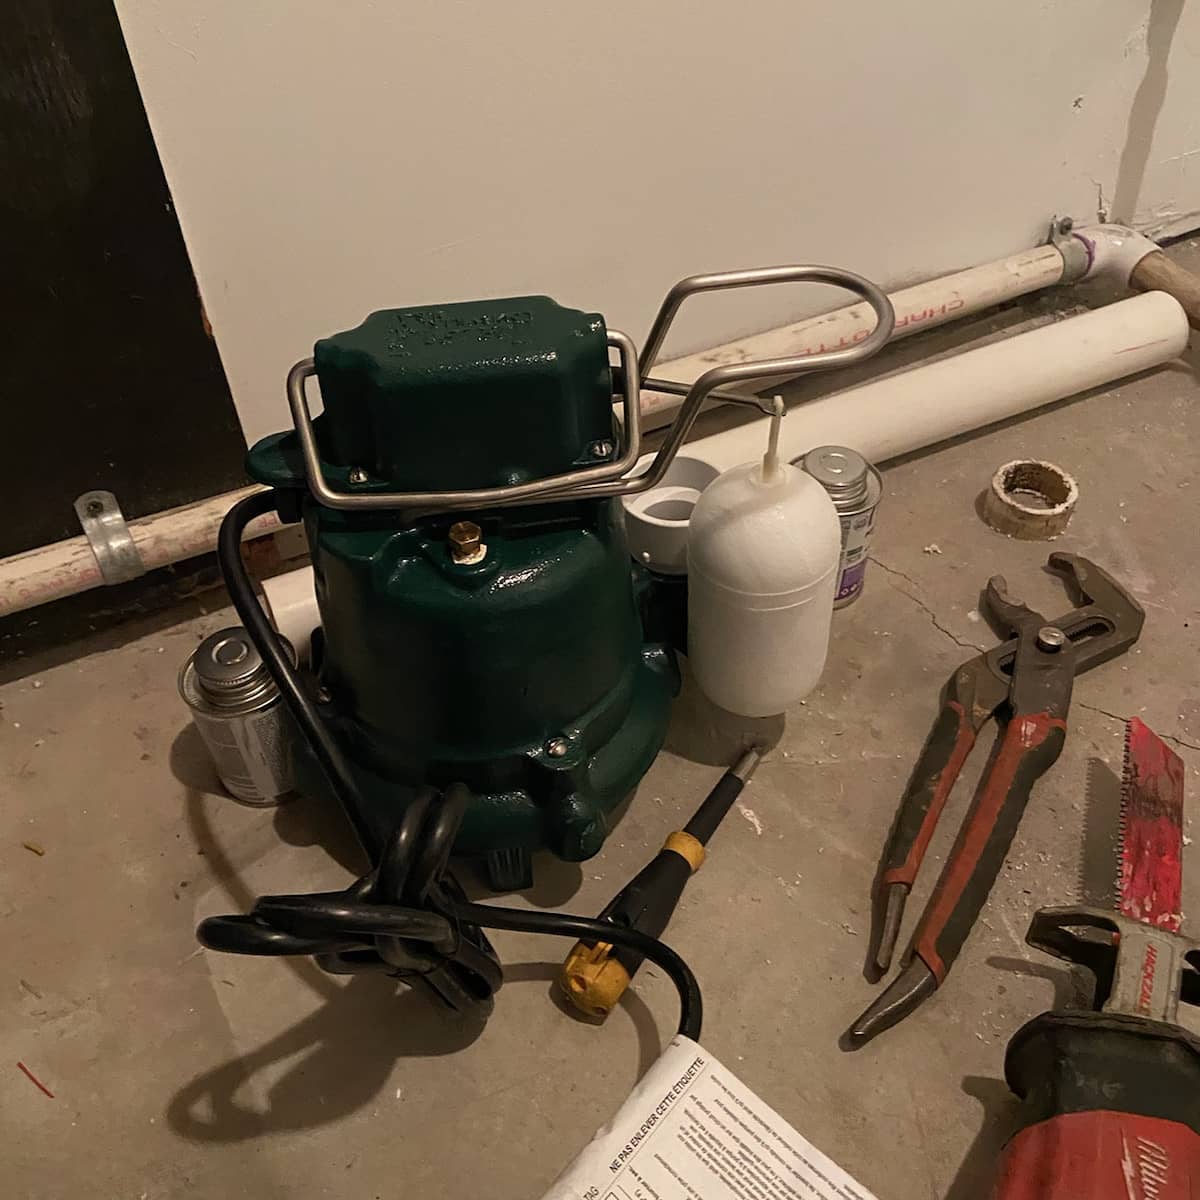 Ejector Pump Cost To Replace in Doylestown, PA 